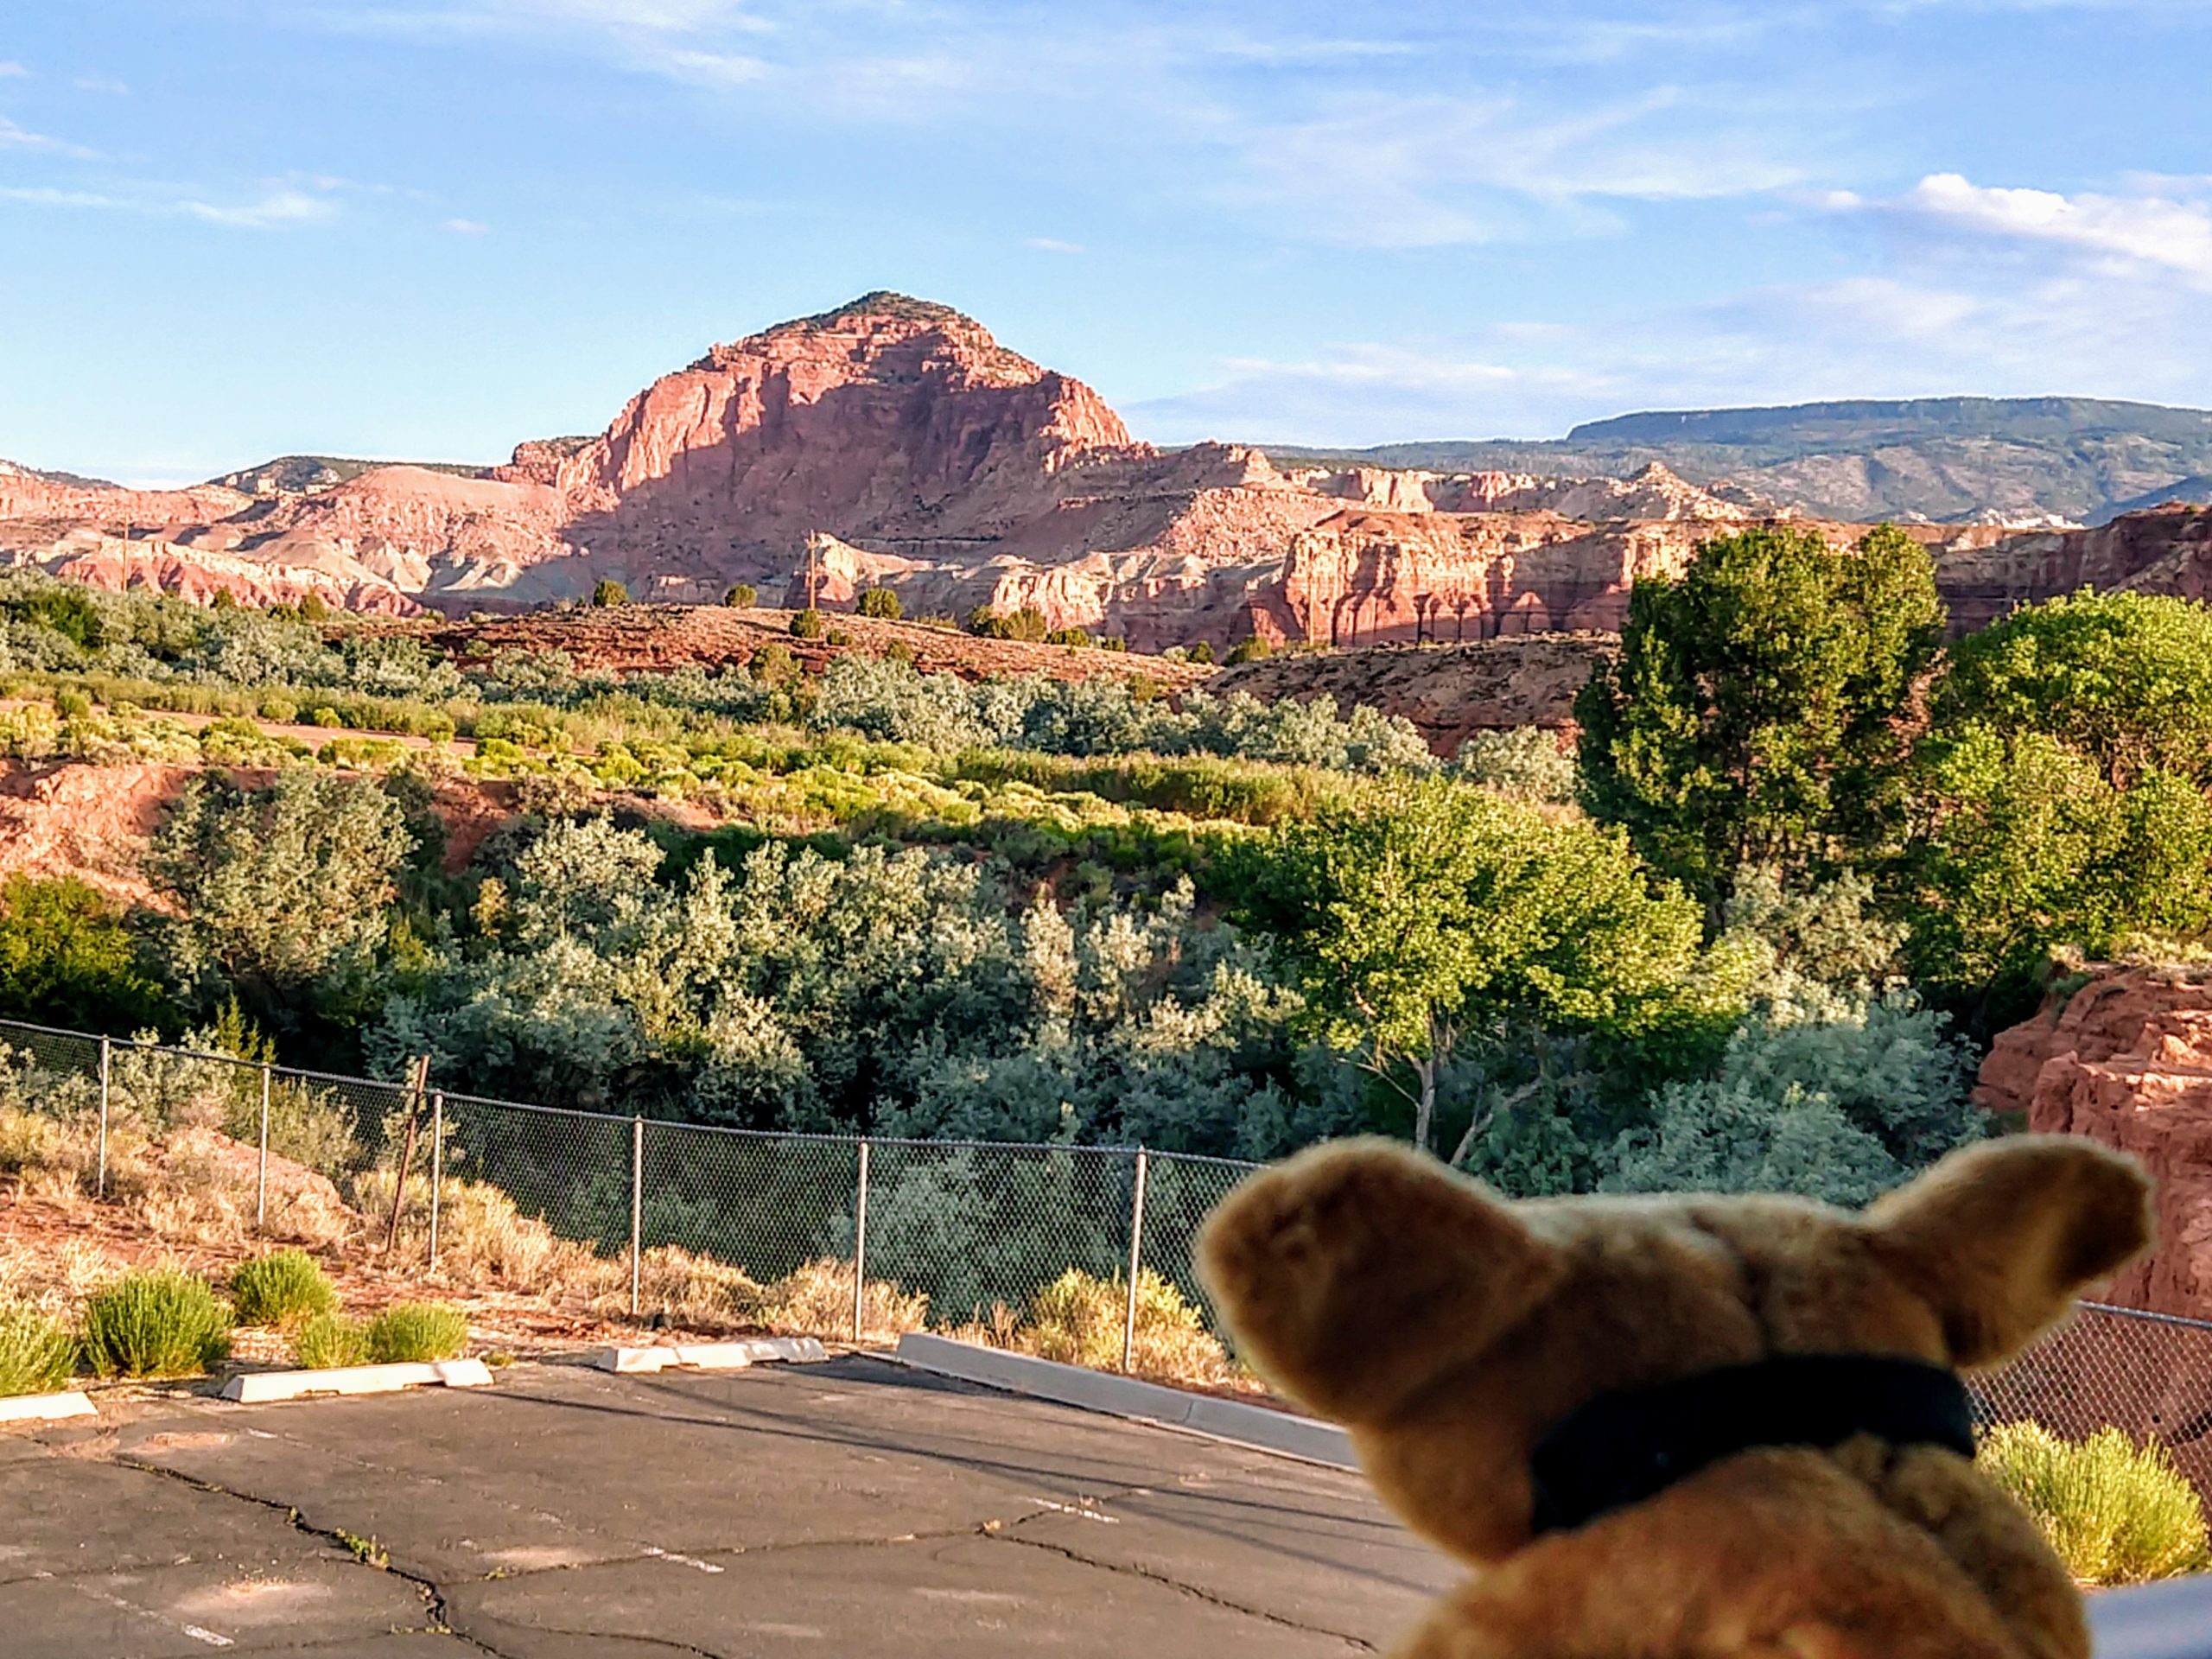 My traveling companion Griffith the Traveling Mountain Lion marveled at the red rocks near Capitol Reef National Park.